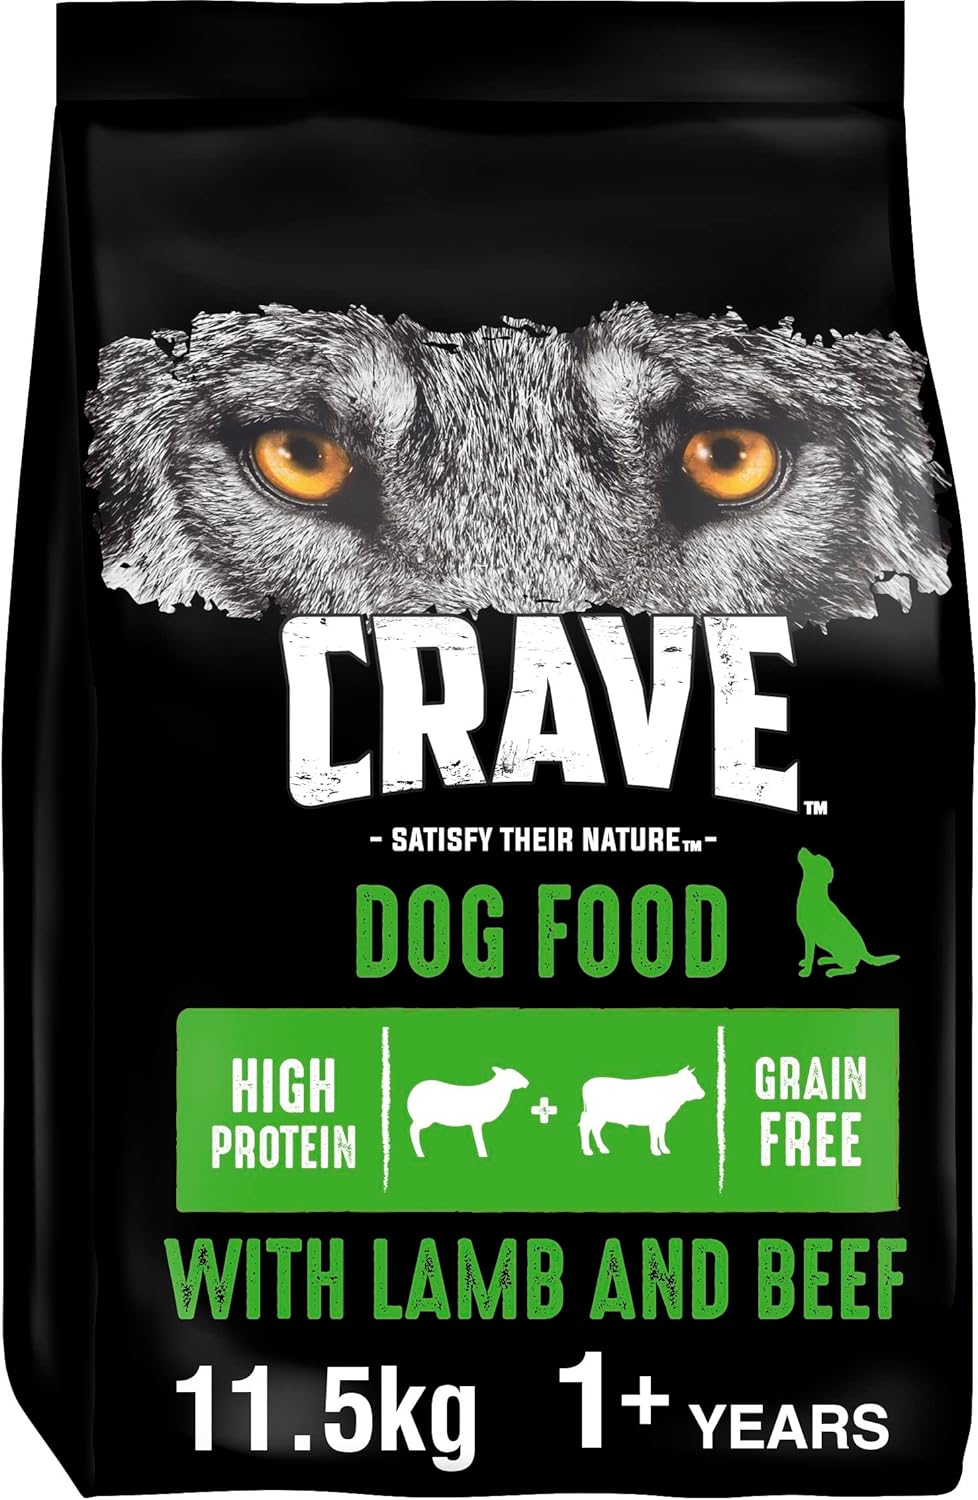 Crave Lamb & Beef 11.5 kg Bag, Premium Adult Dry Dog Food with high Protein, Grain-free?403553